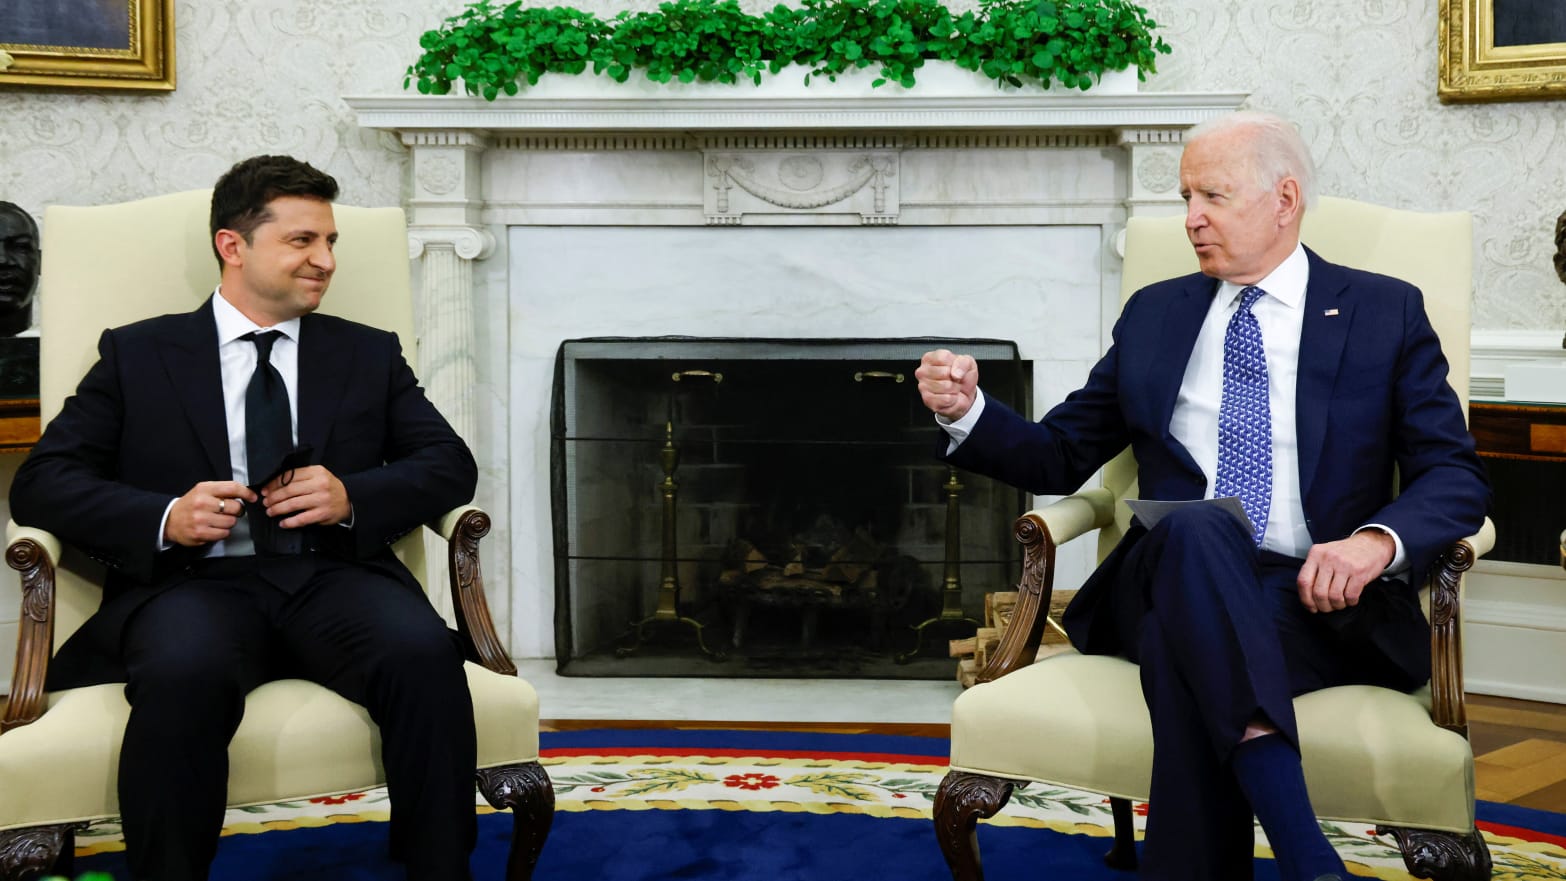 U.S. President Joe Biden gestures as he meets with Ukraine's President Volodymyr Zelenskiy in the Oval Office at the White House in Washington, U.S., September 1, 2021.